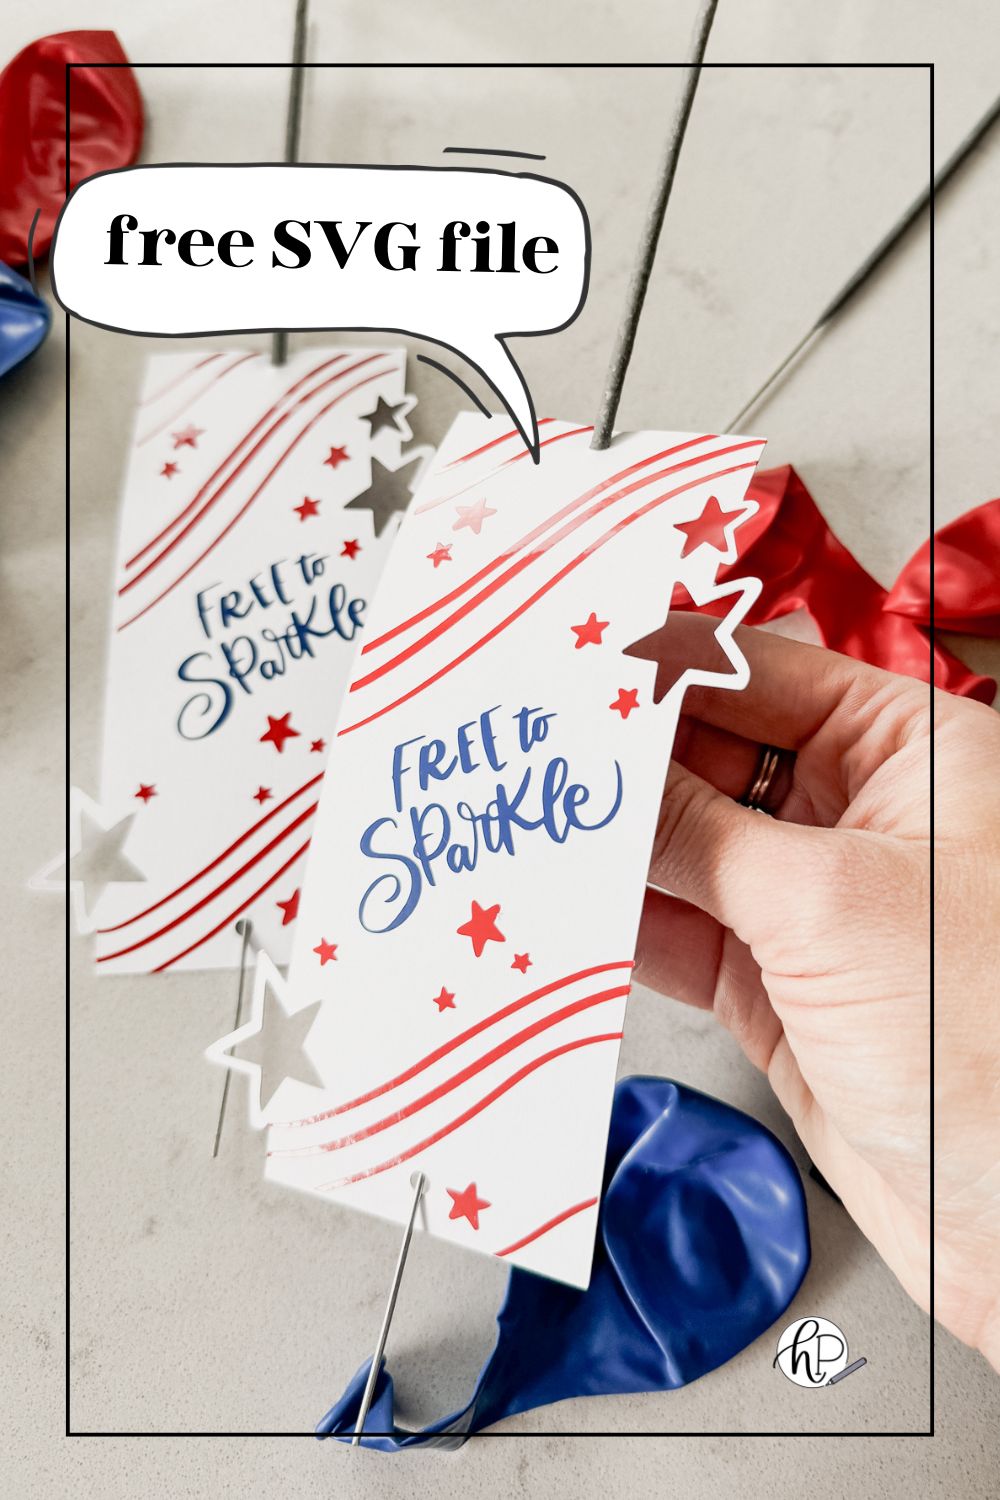 image of fourth of july sparklers holders free svg file with 3 layers, shown assembled with sparklers, being held by hand above a countertop with red and blue balloons text over reads: free svg file